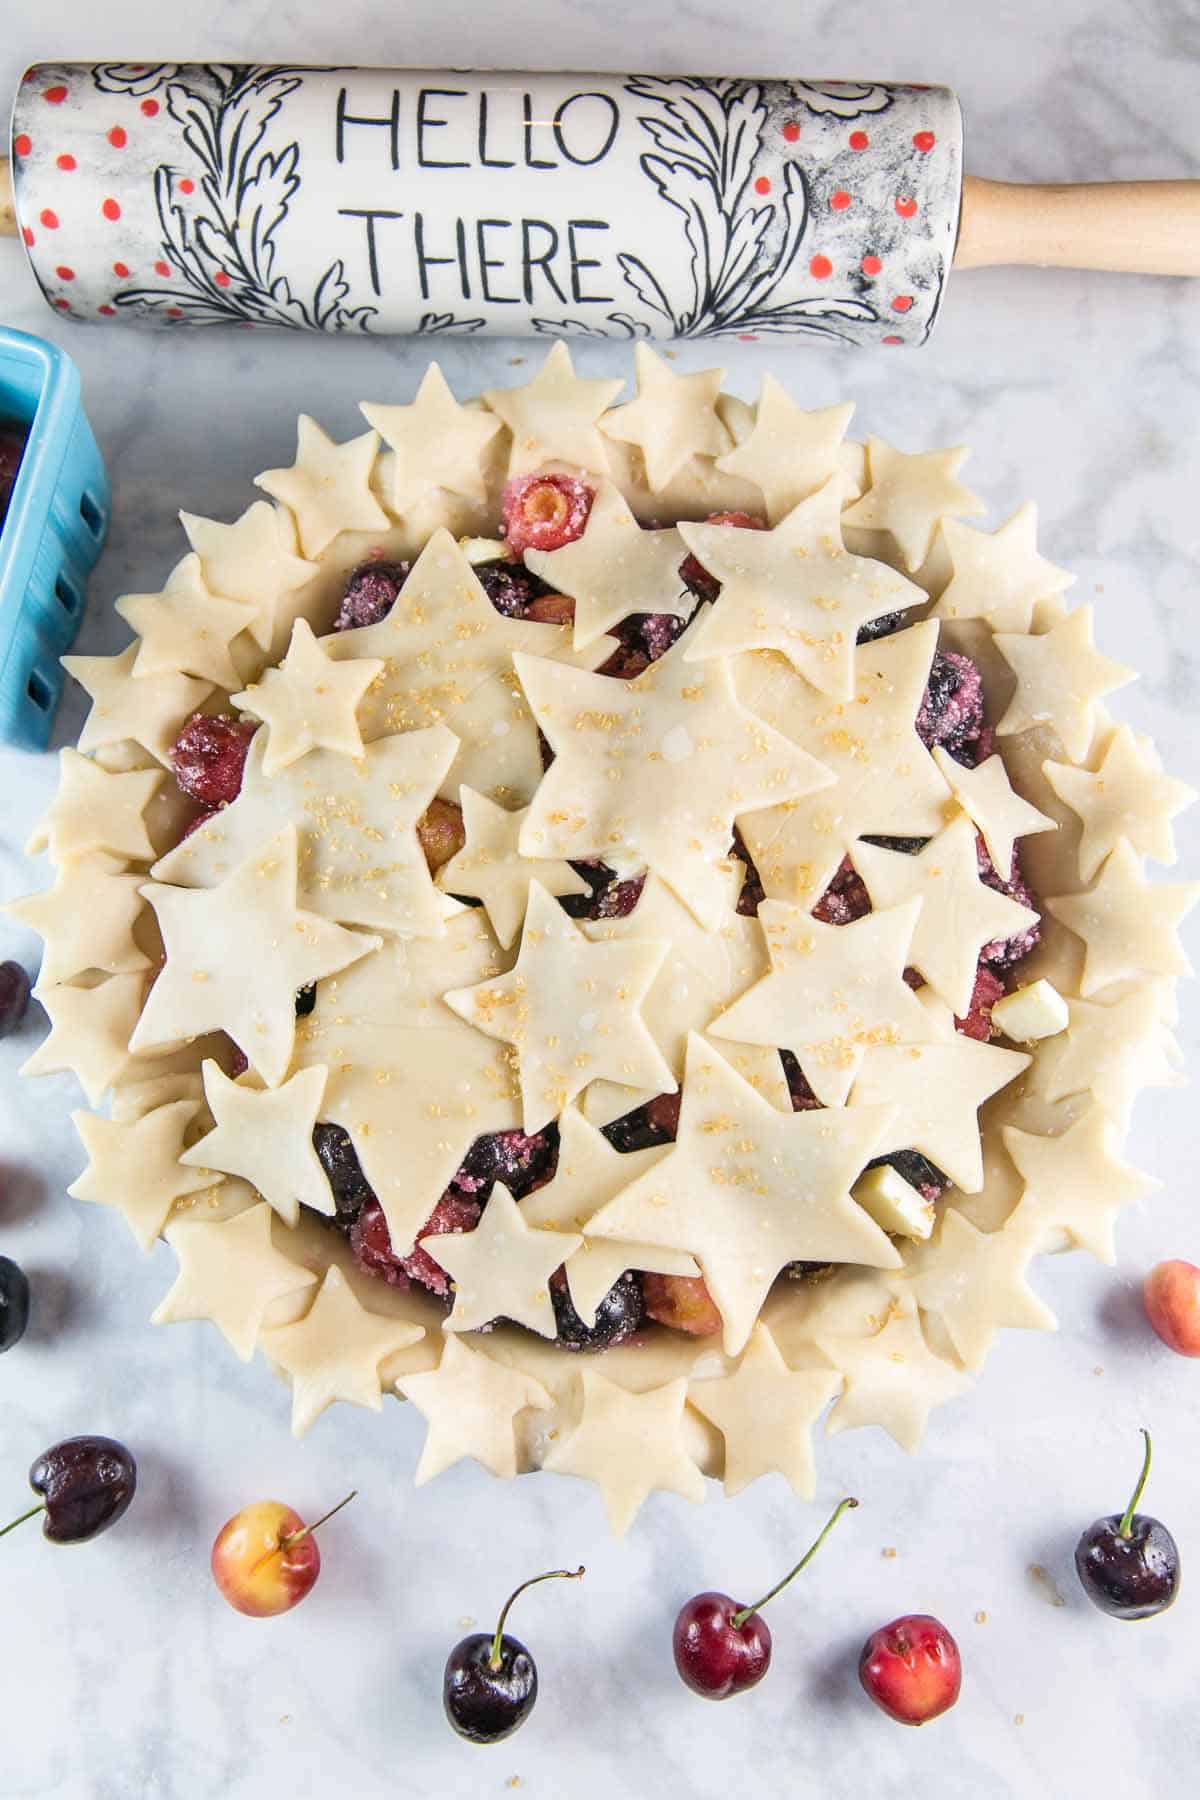 unbaked pie covered with star shapes cut out of the pie crust